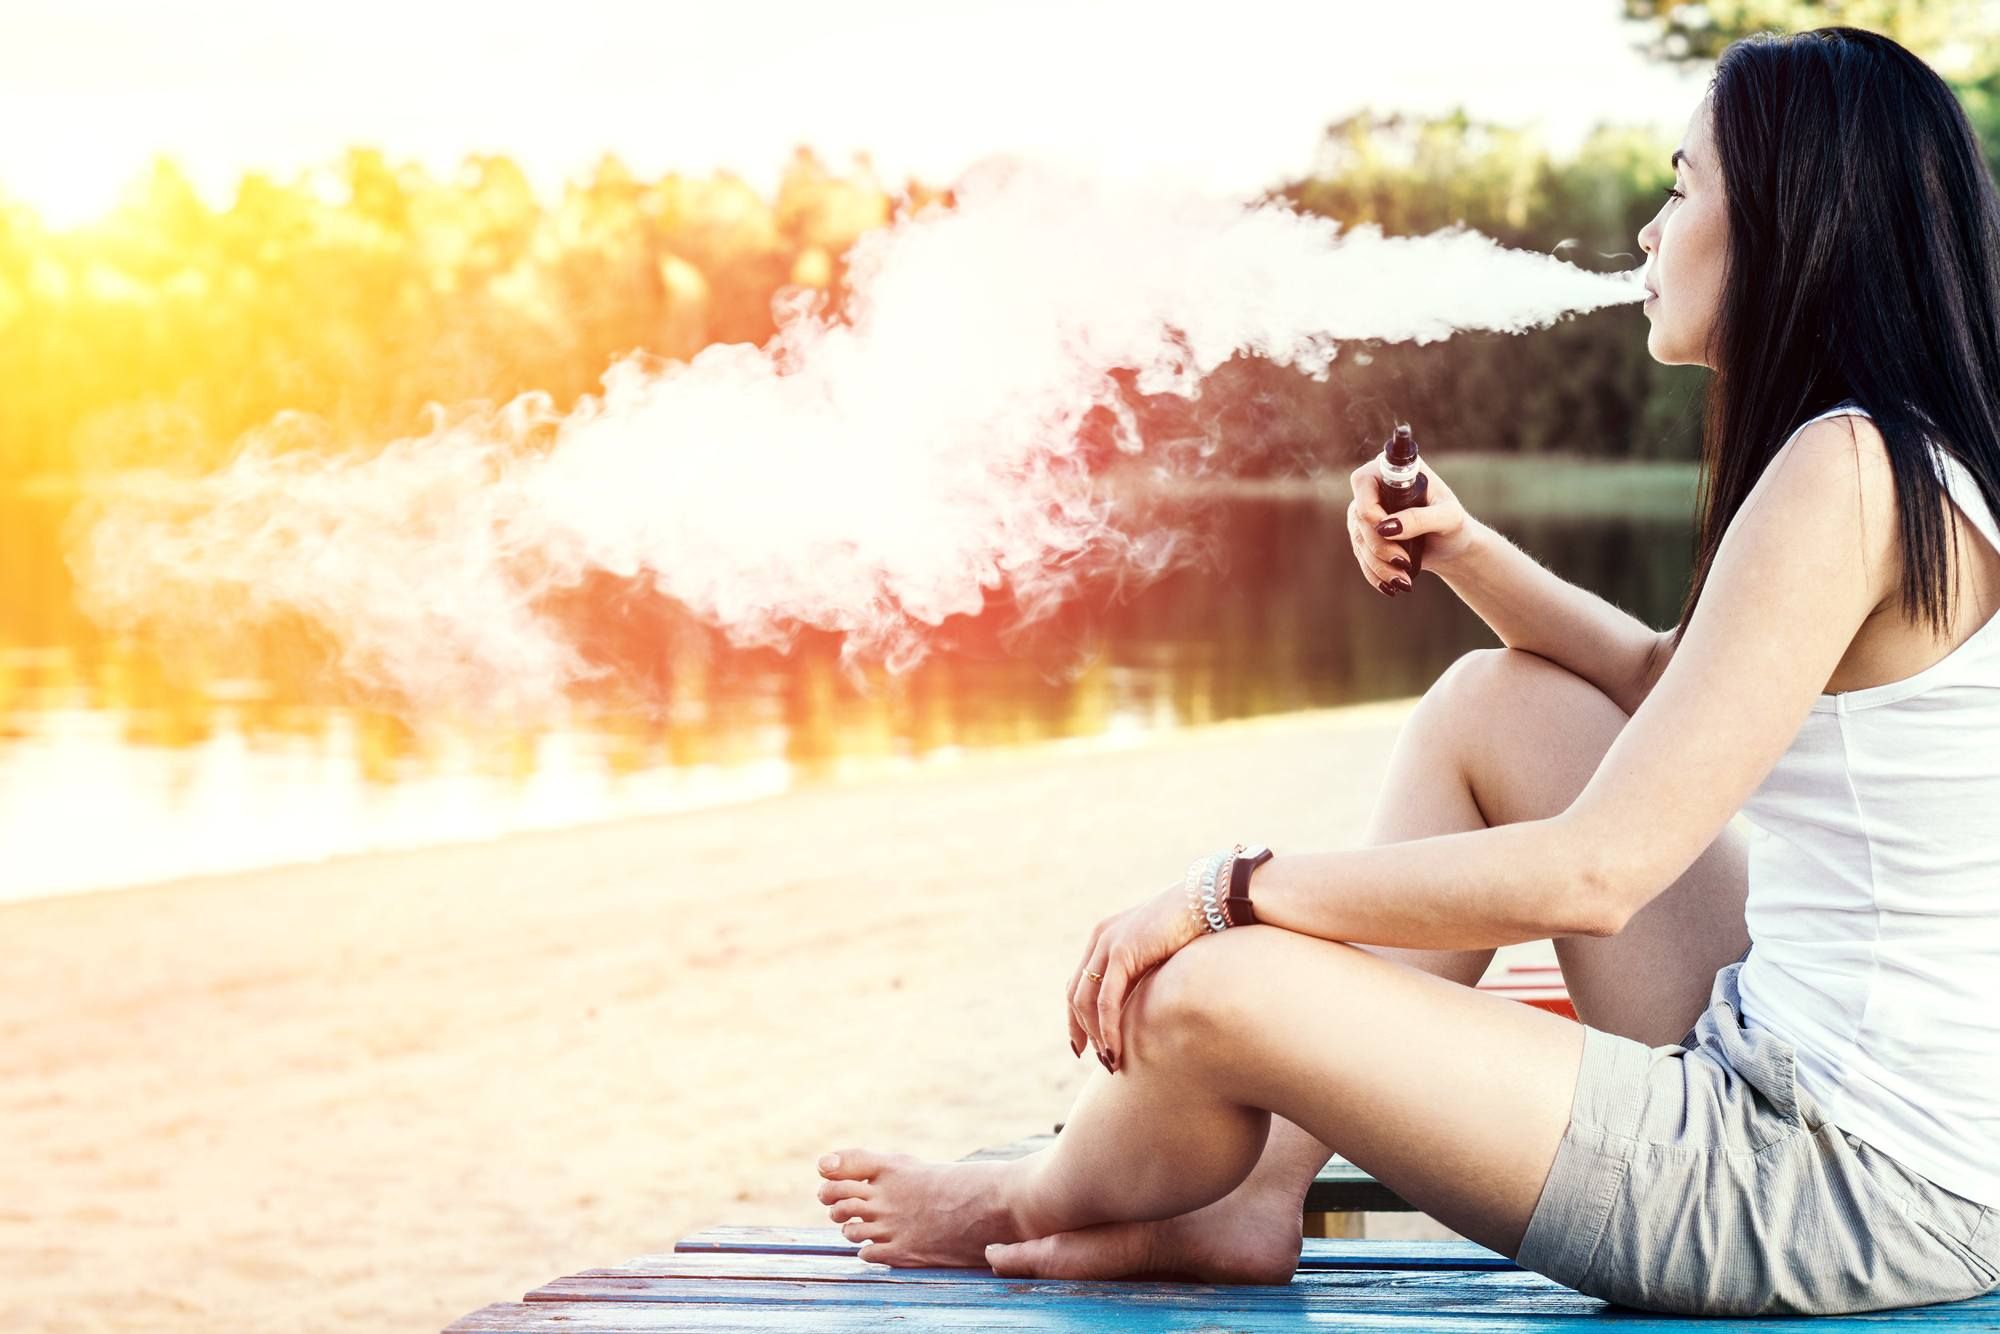 E-cigarette nicotine addiction may lessen due to social distancing